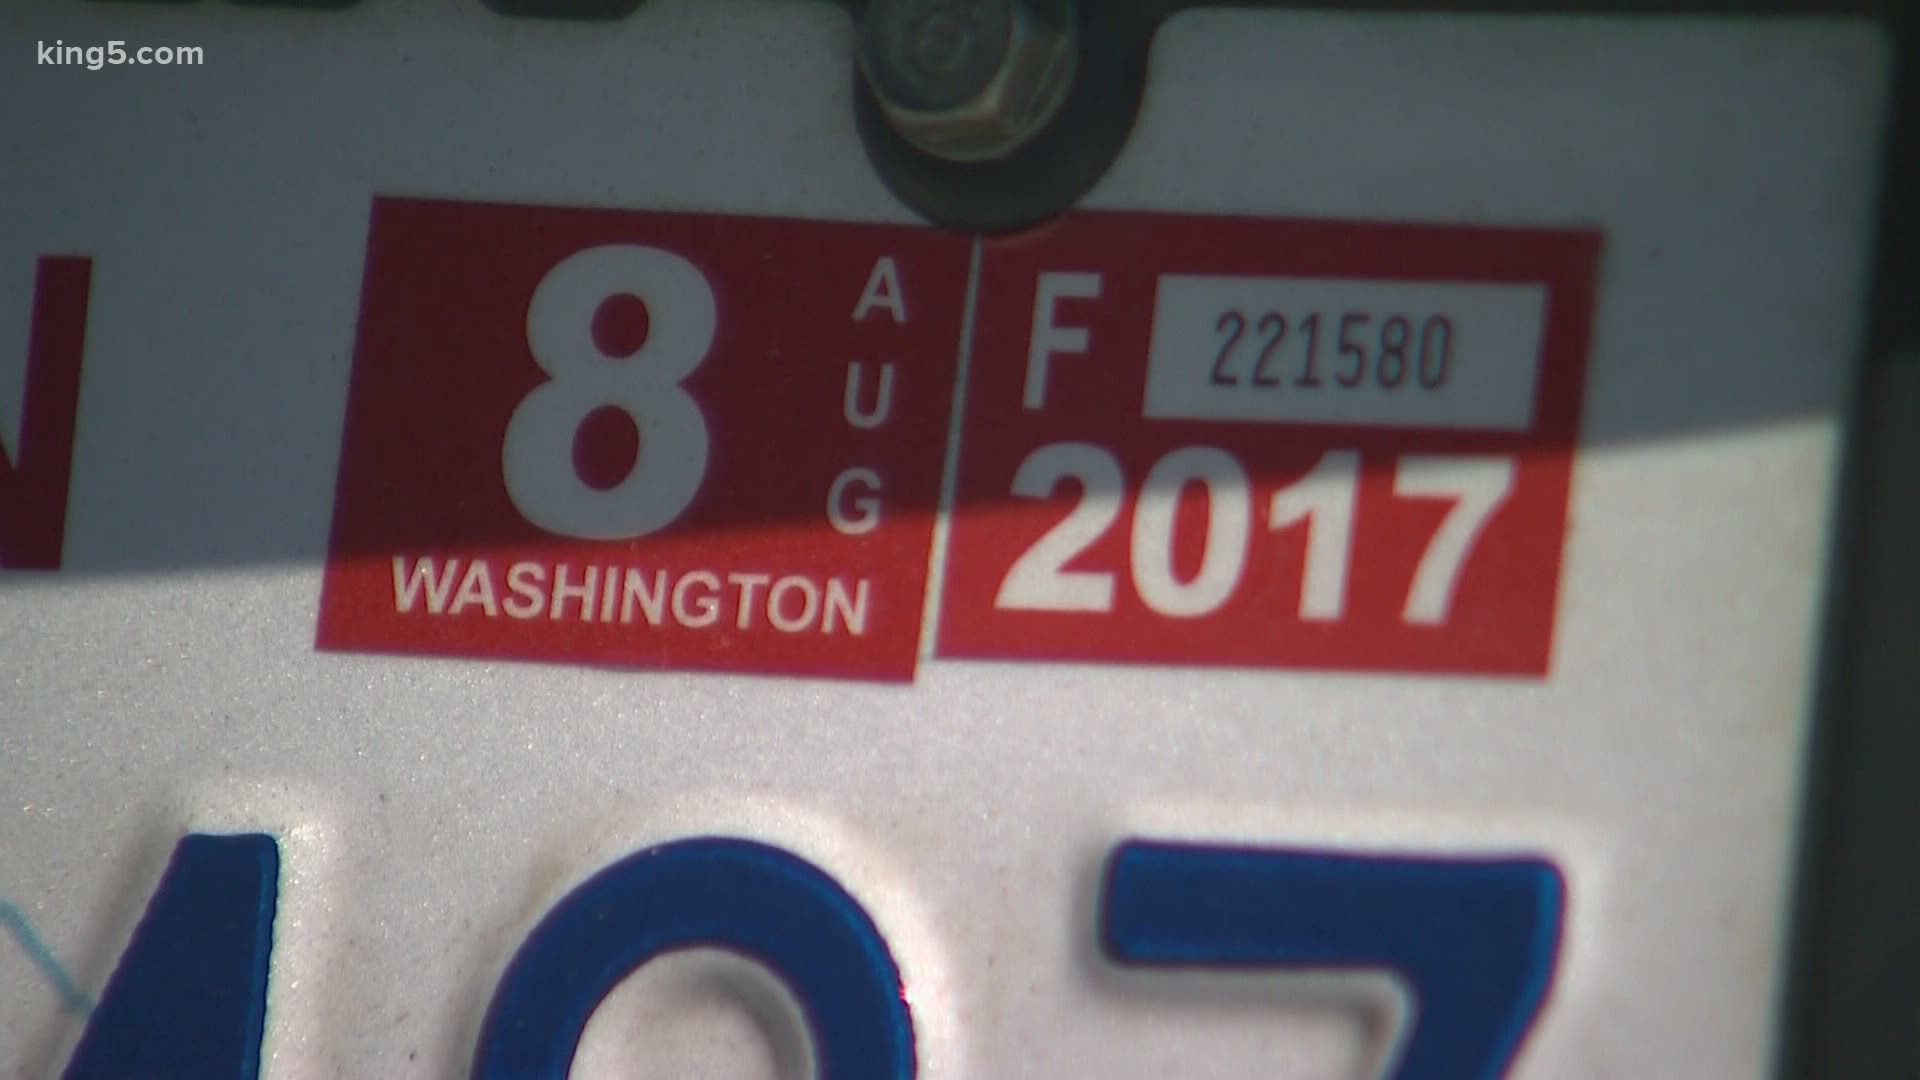 The Department of Licensing extended expiration dates of driver licenses, but there is no guidance on car tabs.